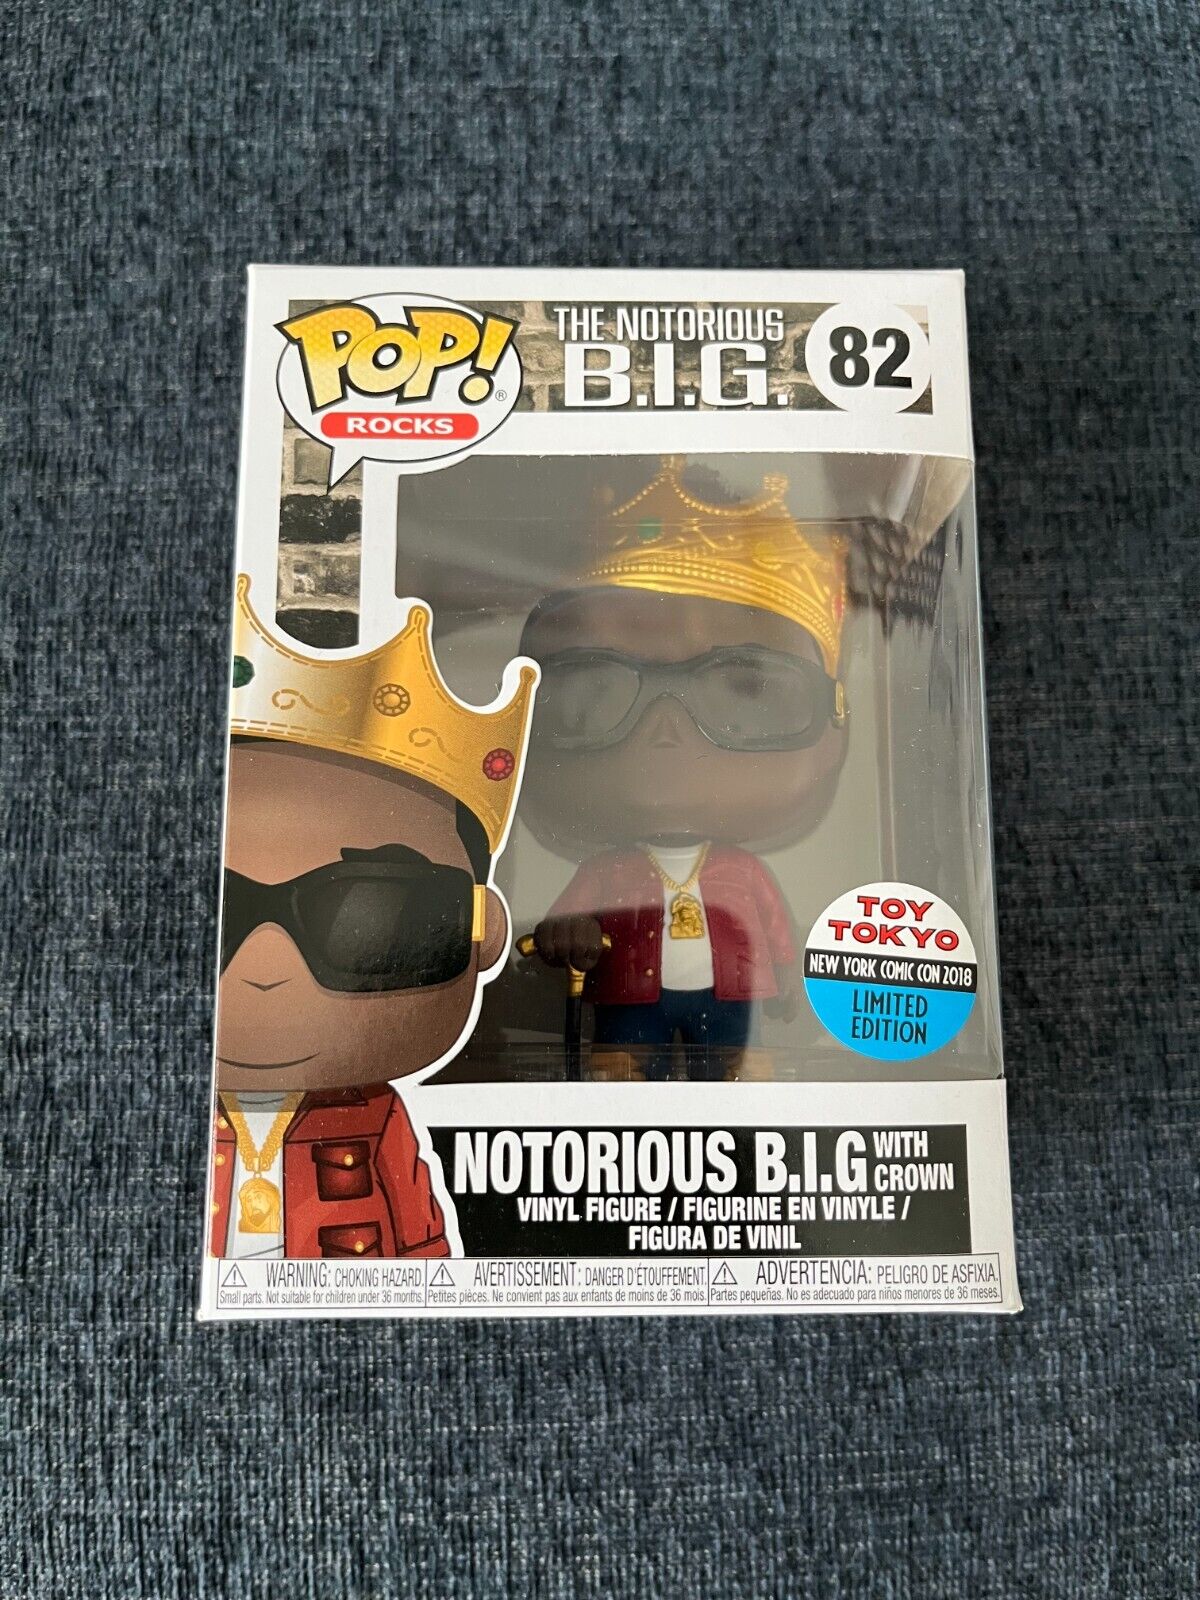 Funko Pop - #82 Notorious B.I.G. with Crown 2018 NYCC Toy Toyko - New